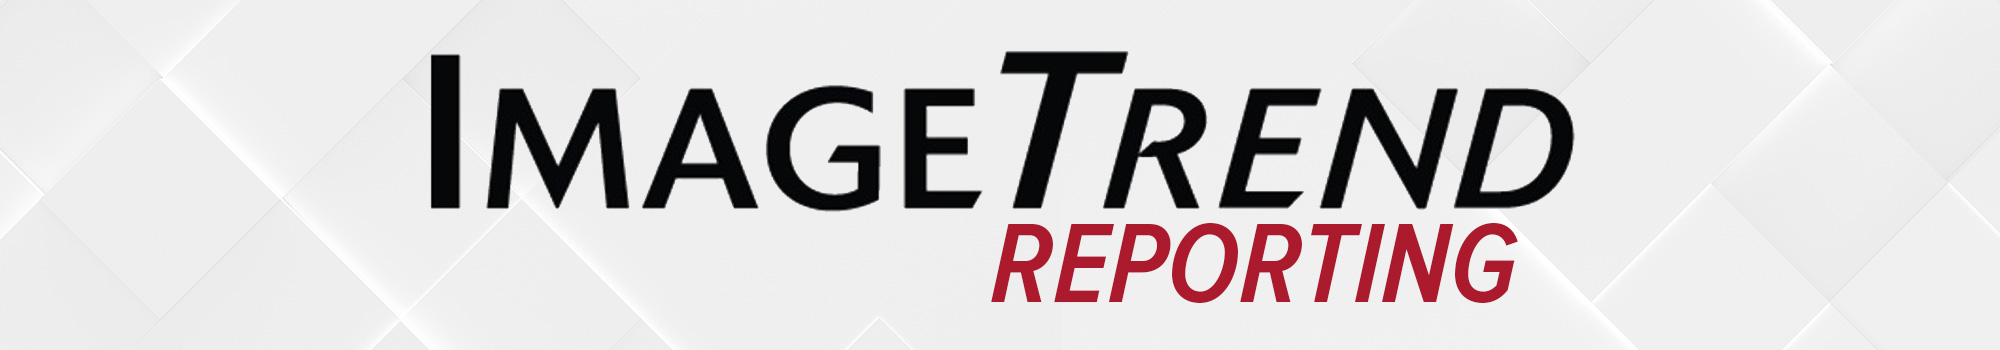 ImageTrend Reporting text